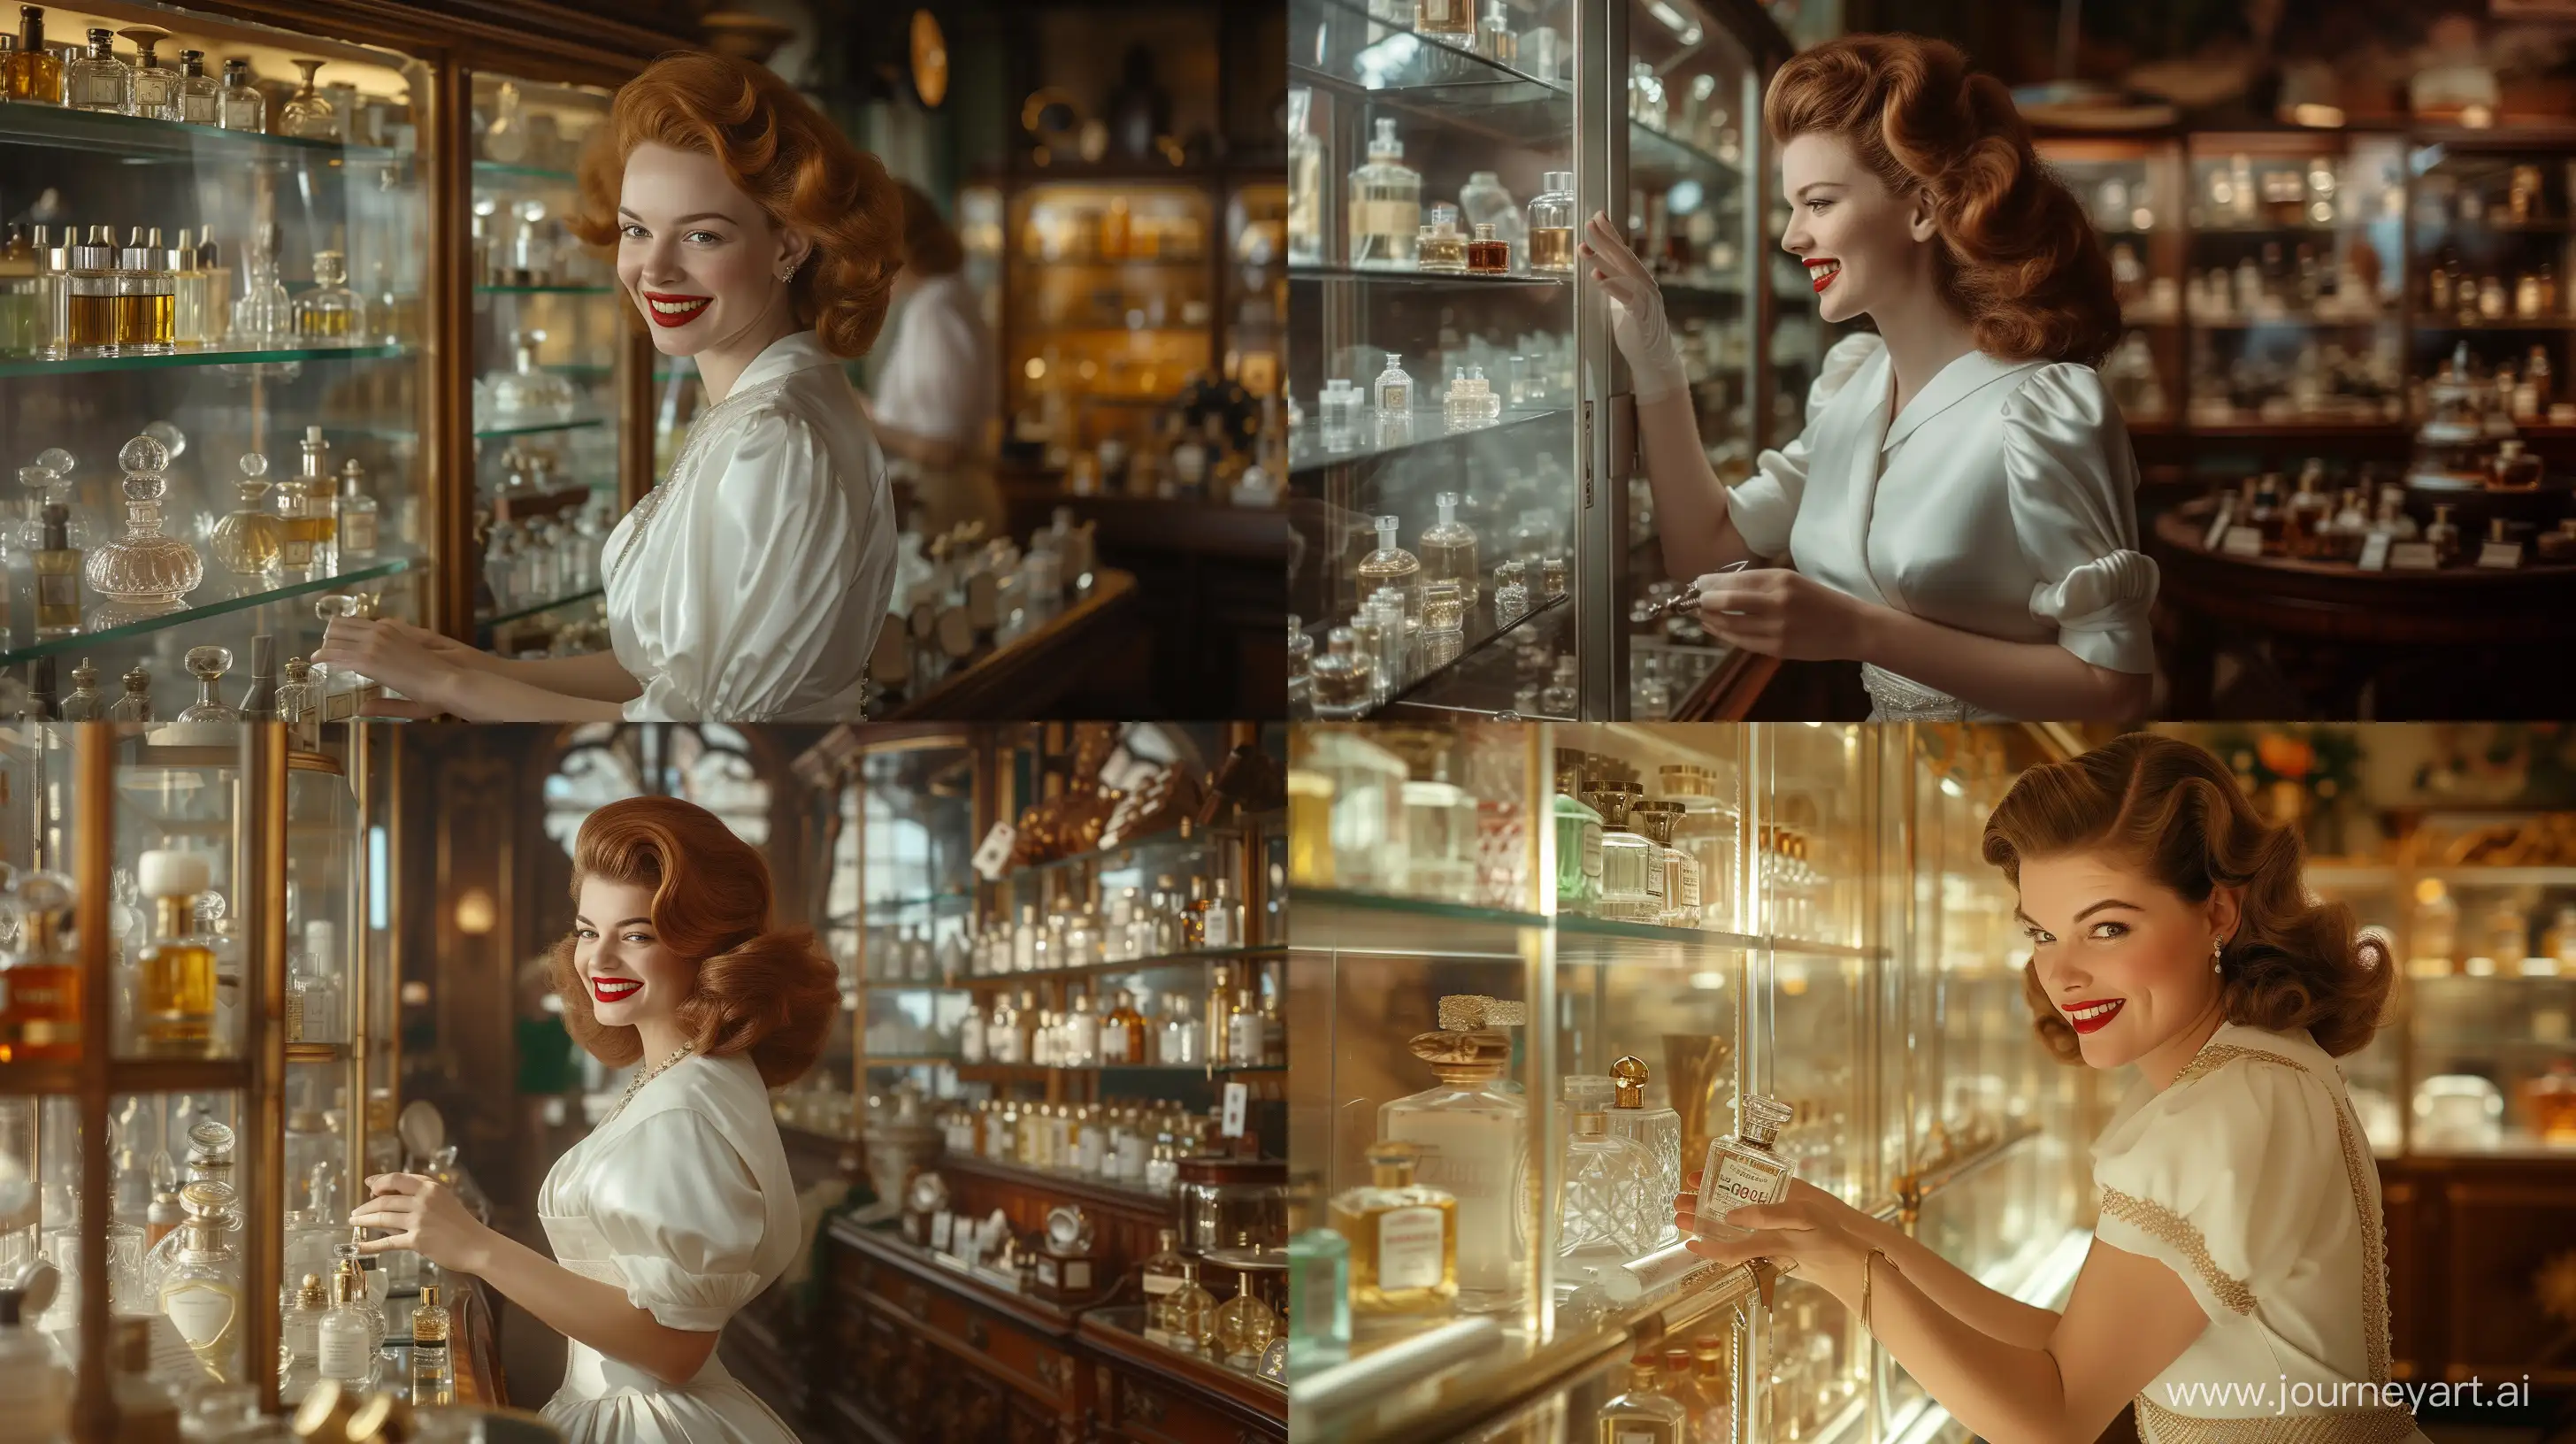  Rita Hayworth immersed in a vintage perfumery, exploring glass vitrines showcasing exquisite fragrances, her smile reflecting a sense of nostalgia, wearing a pristine white Vogue dress from the 50s, detailed retro setting with classic 50s hair and clothes, Photography, shot with a Canon EOS 5D Mark IV, 50mm f/1.8 lens, capturing the essence of the era, --ar 16:9